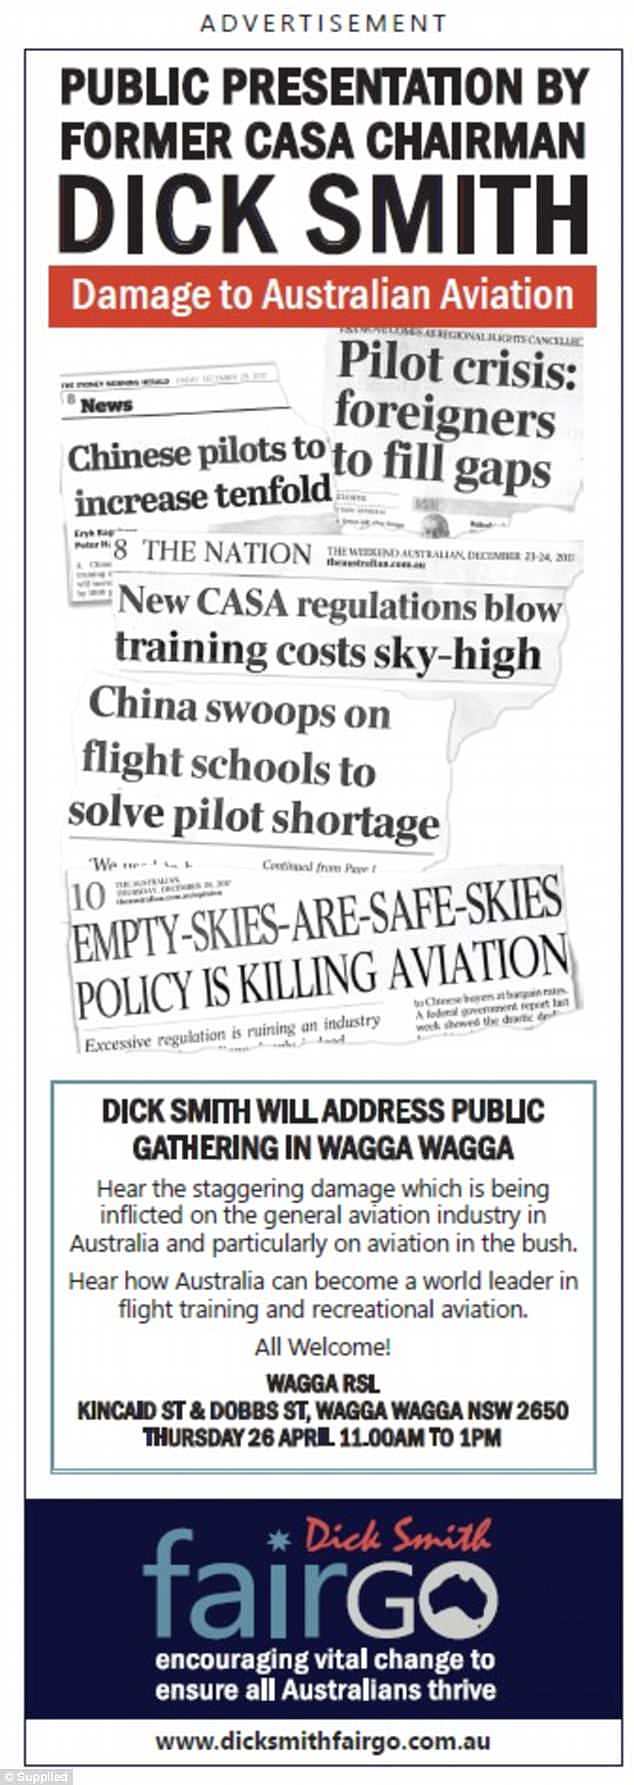 Mr Smith is taking his message to Wagga Wagga, in southern New South Wales, in a bid to put pressure on Nationals Deputy Prime Michael McCormack in his own seat and his published newspaper advertisements (pictured) 